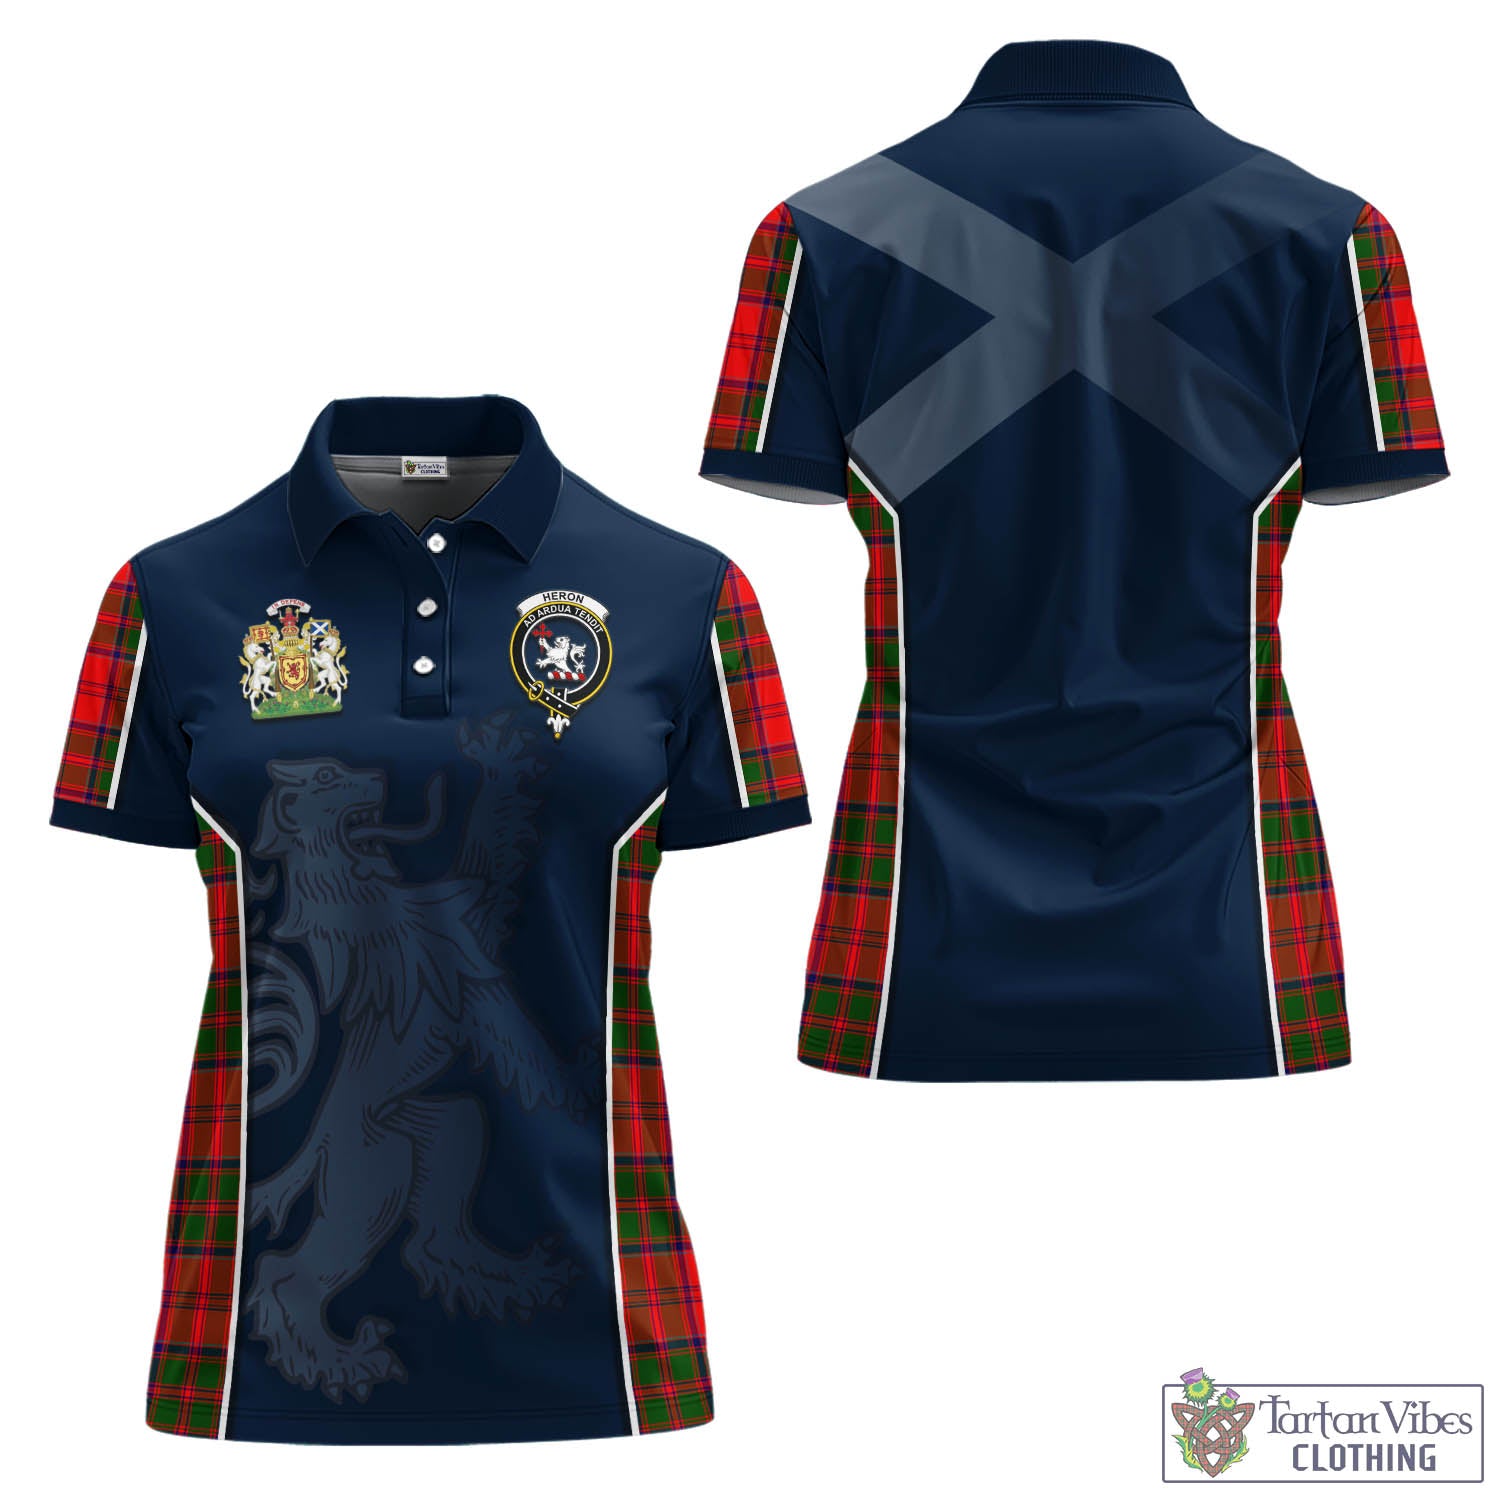 Tartan Vibes Clothing Heron Tartan Women's Polo Shirt with Family Crest and Lion Rampant Vibes Sport Style